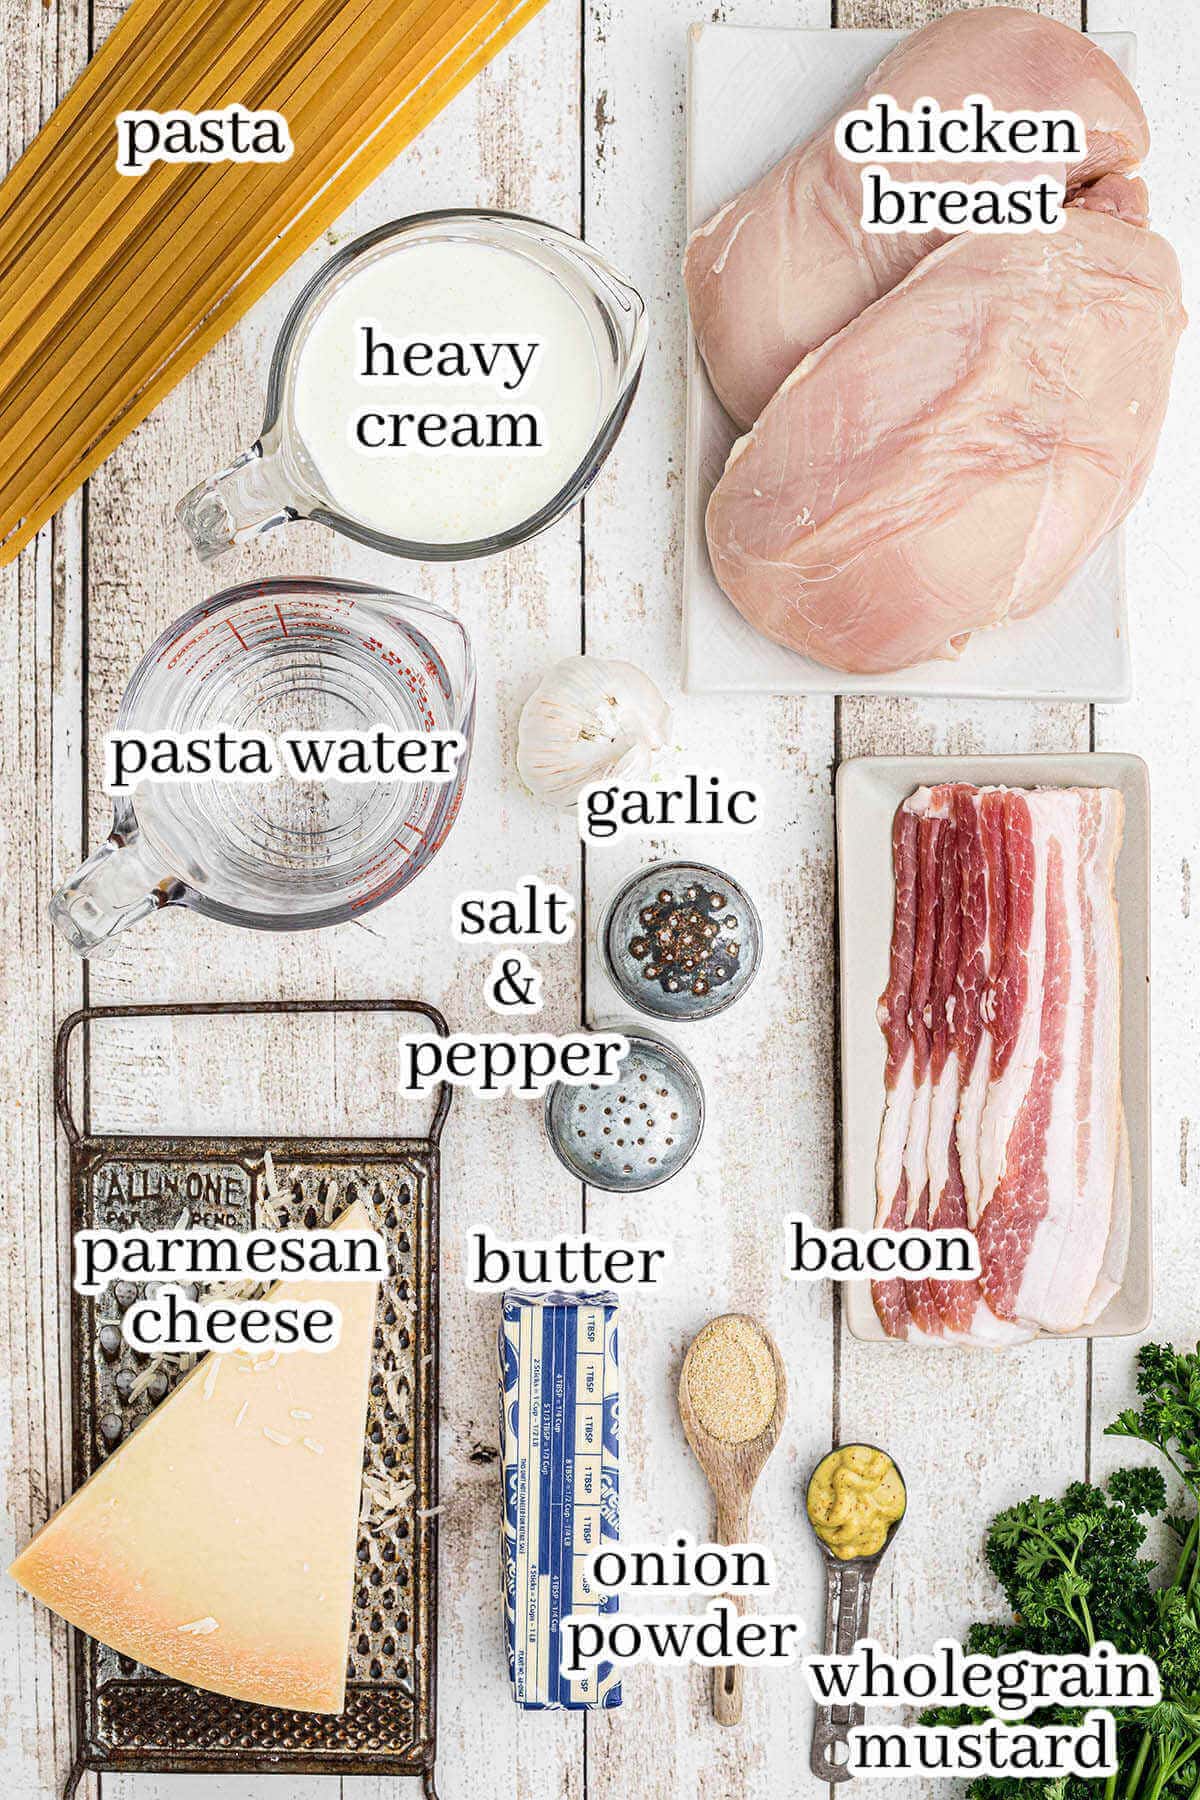 Ingredients to make pasta dinner, with print overlay.